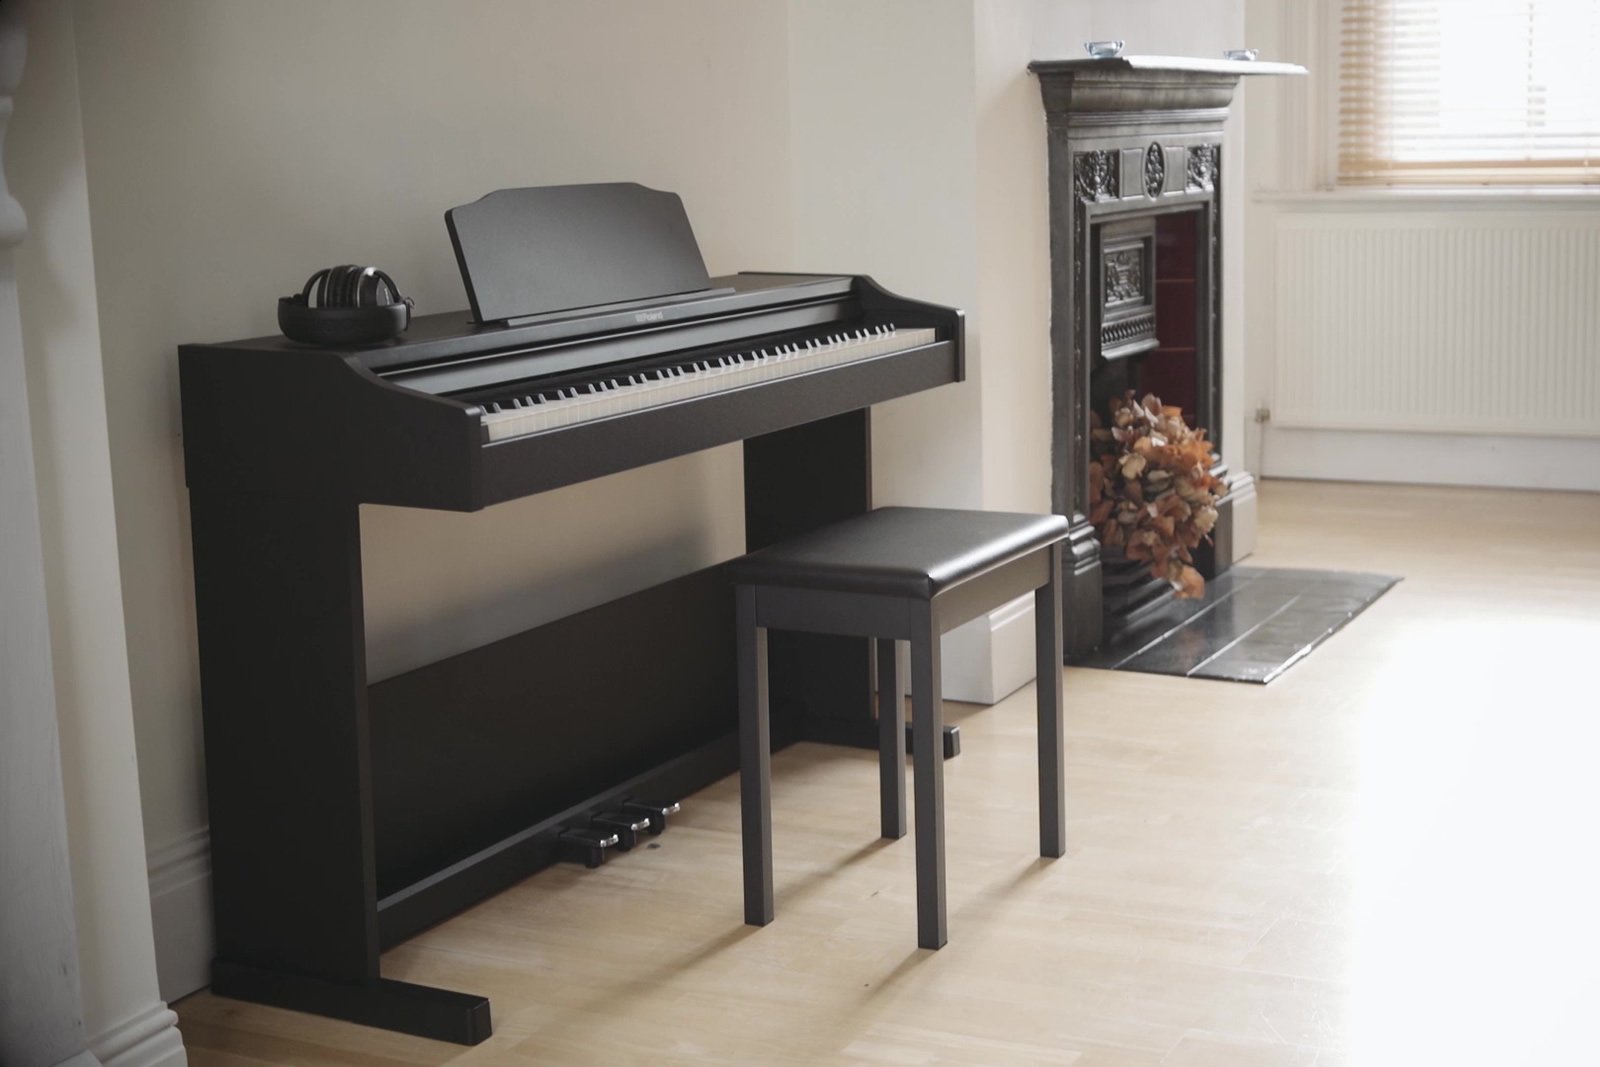 Digital Pianos - Practice on Them and Save Money